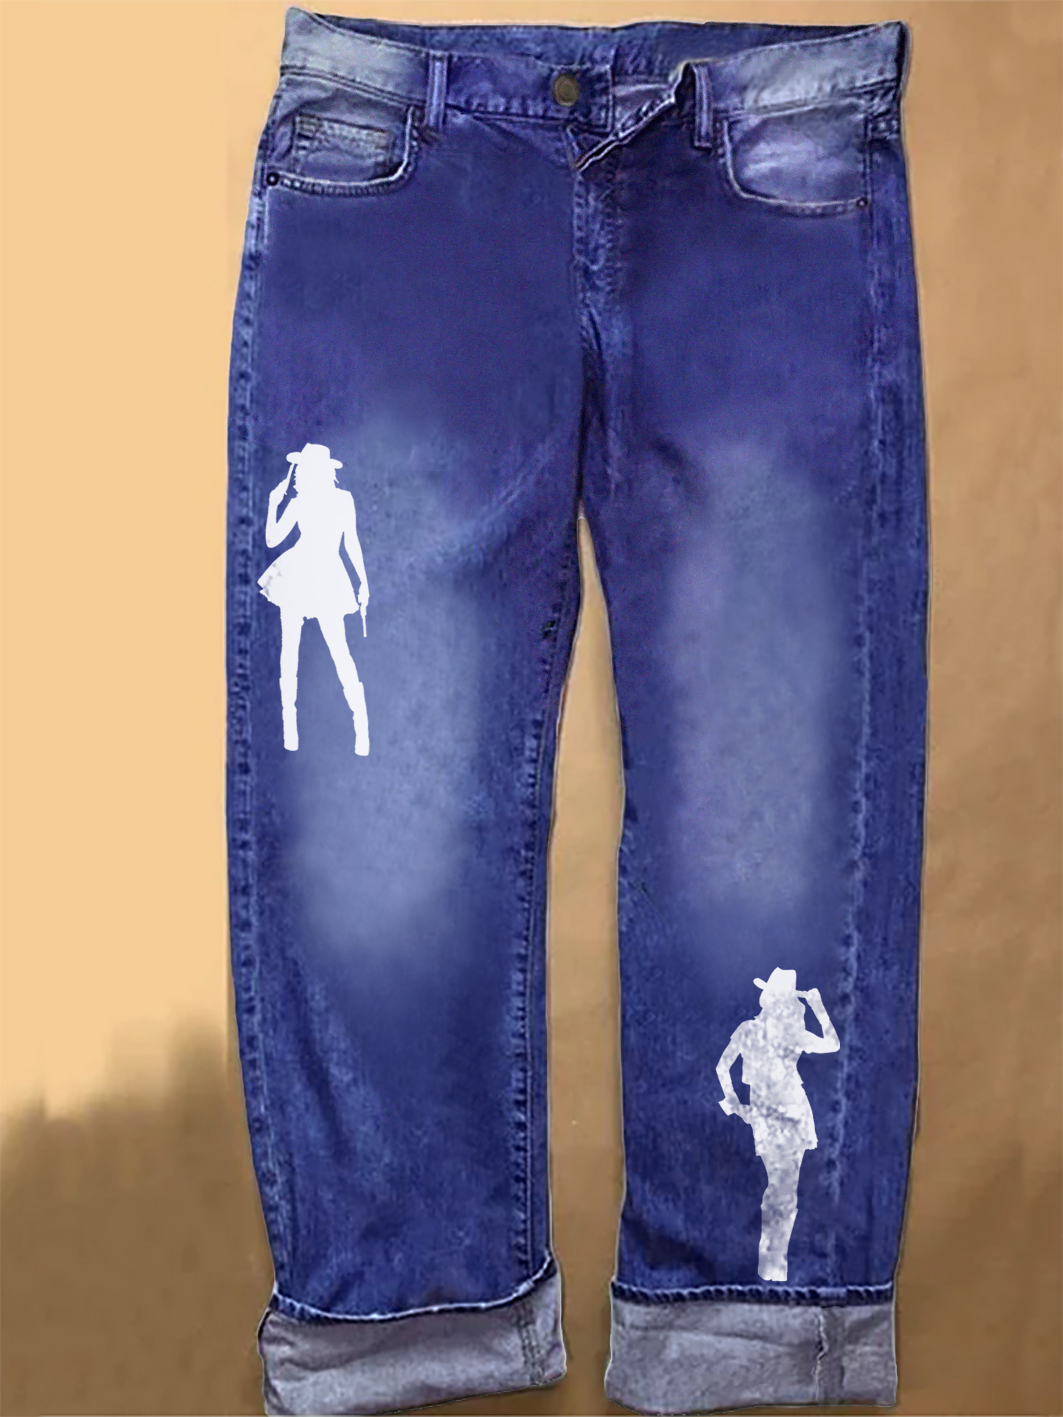 Cowgirl Casual Printed Jeans